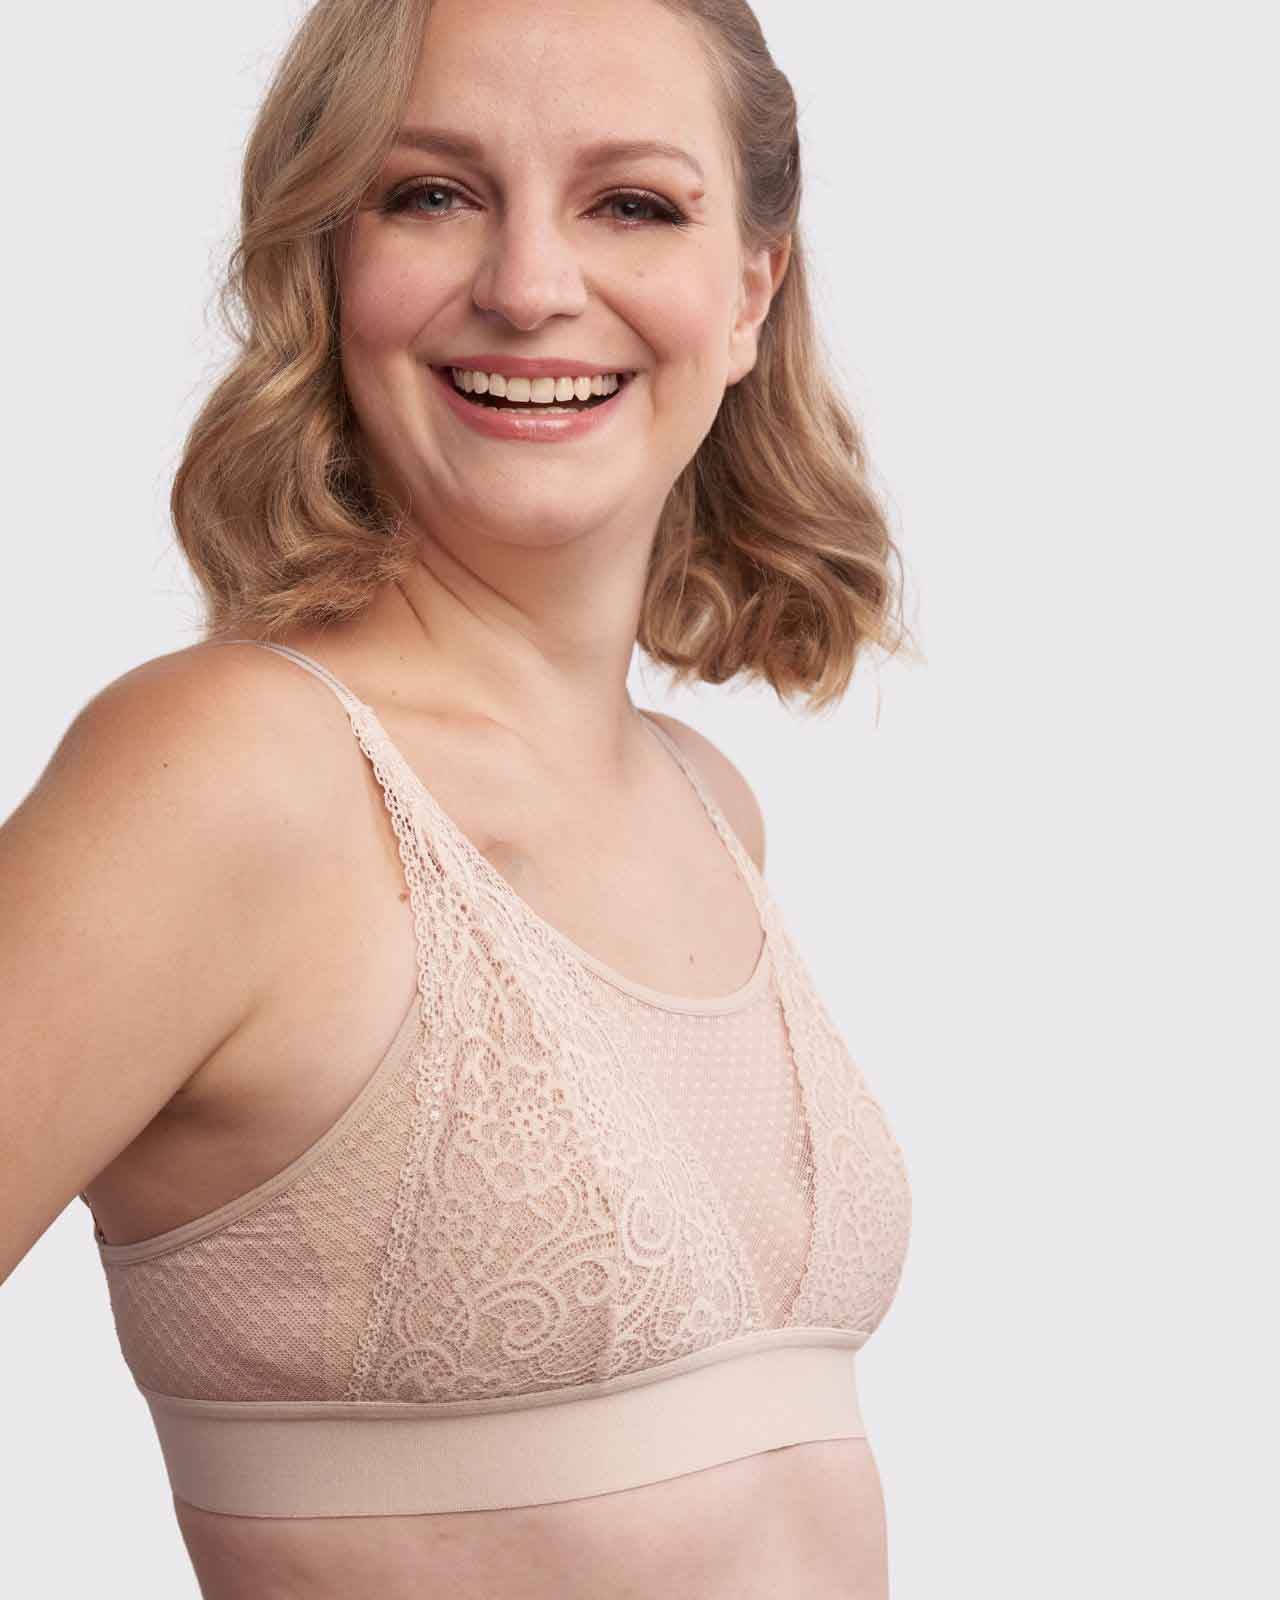 Exclusive bra, transparent lace, embroidery, B to S-cup